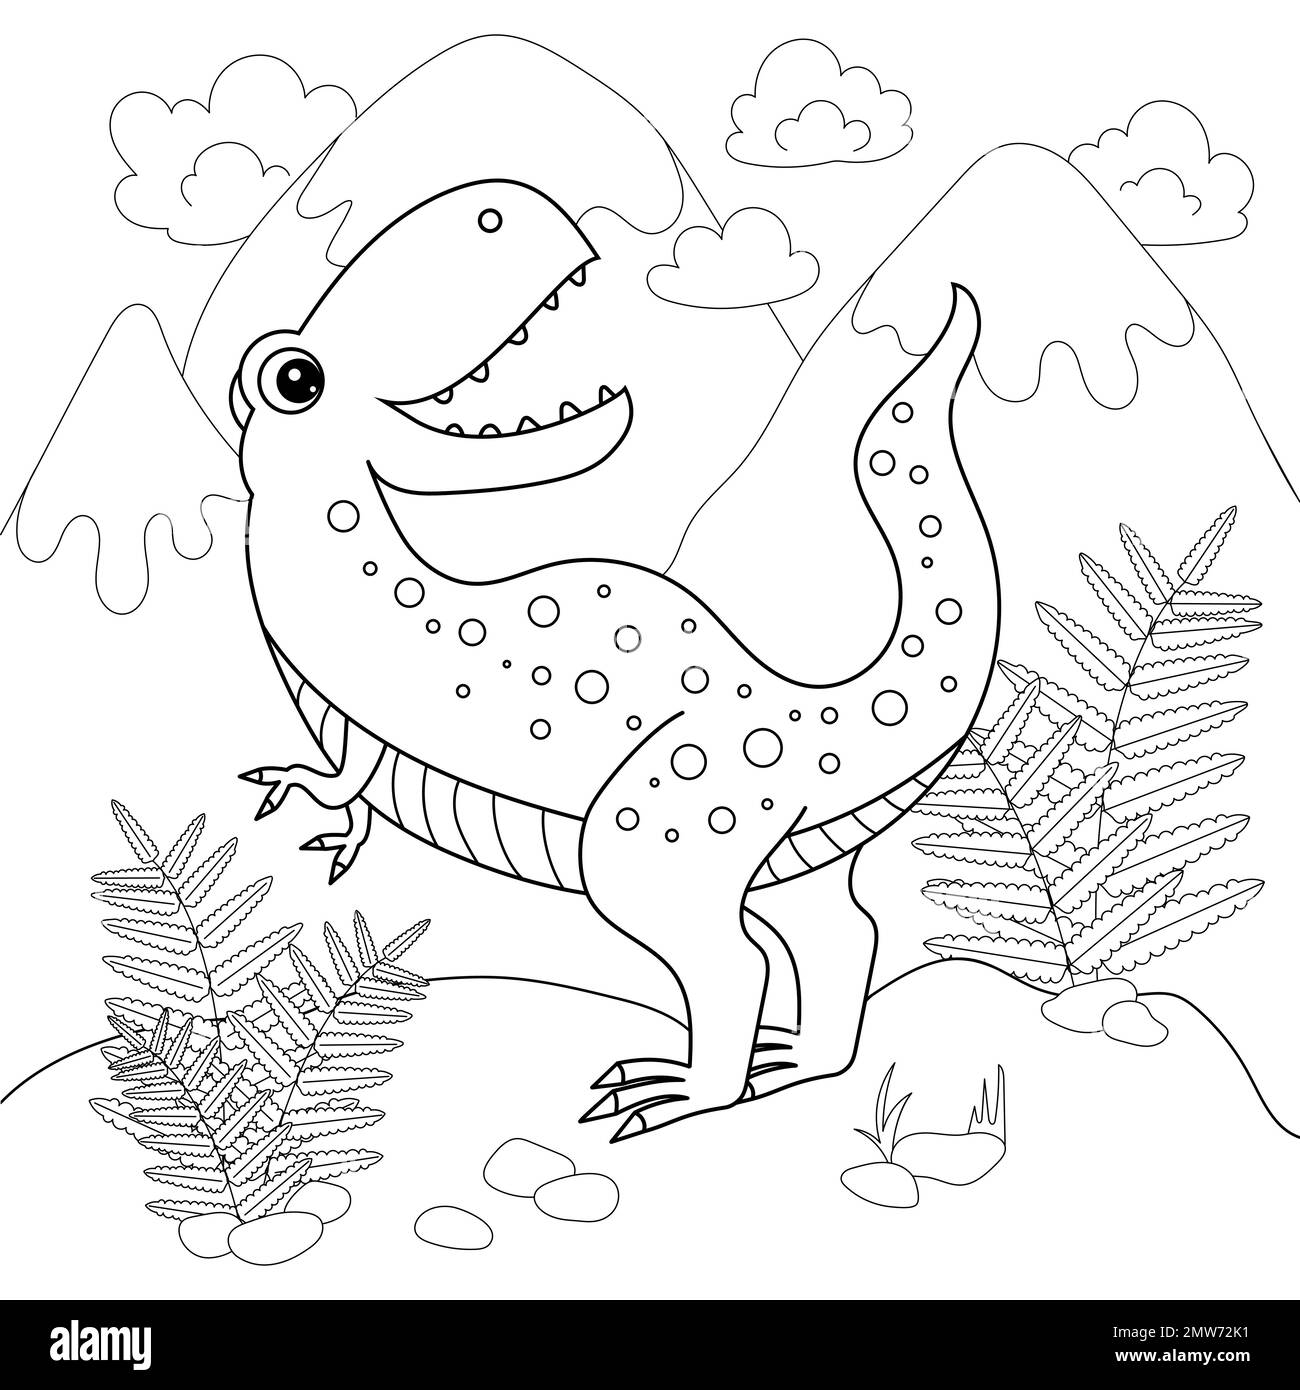 Coloring books Black and White Stock Photos & Images - Alamy